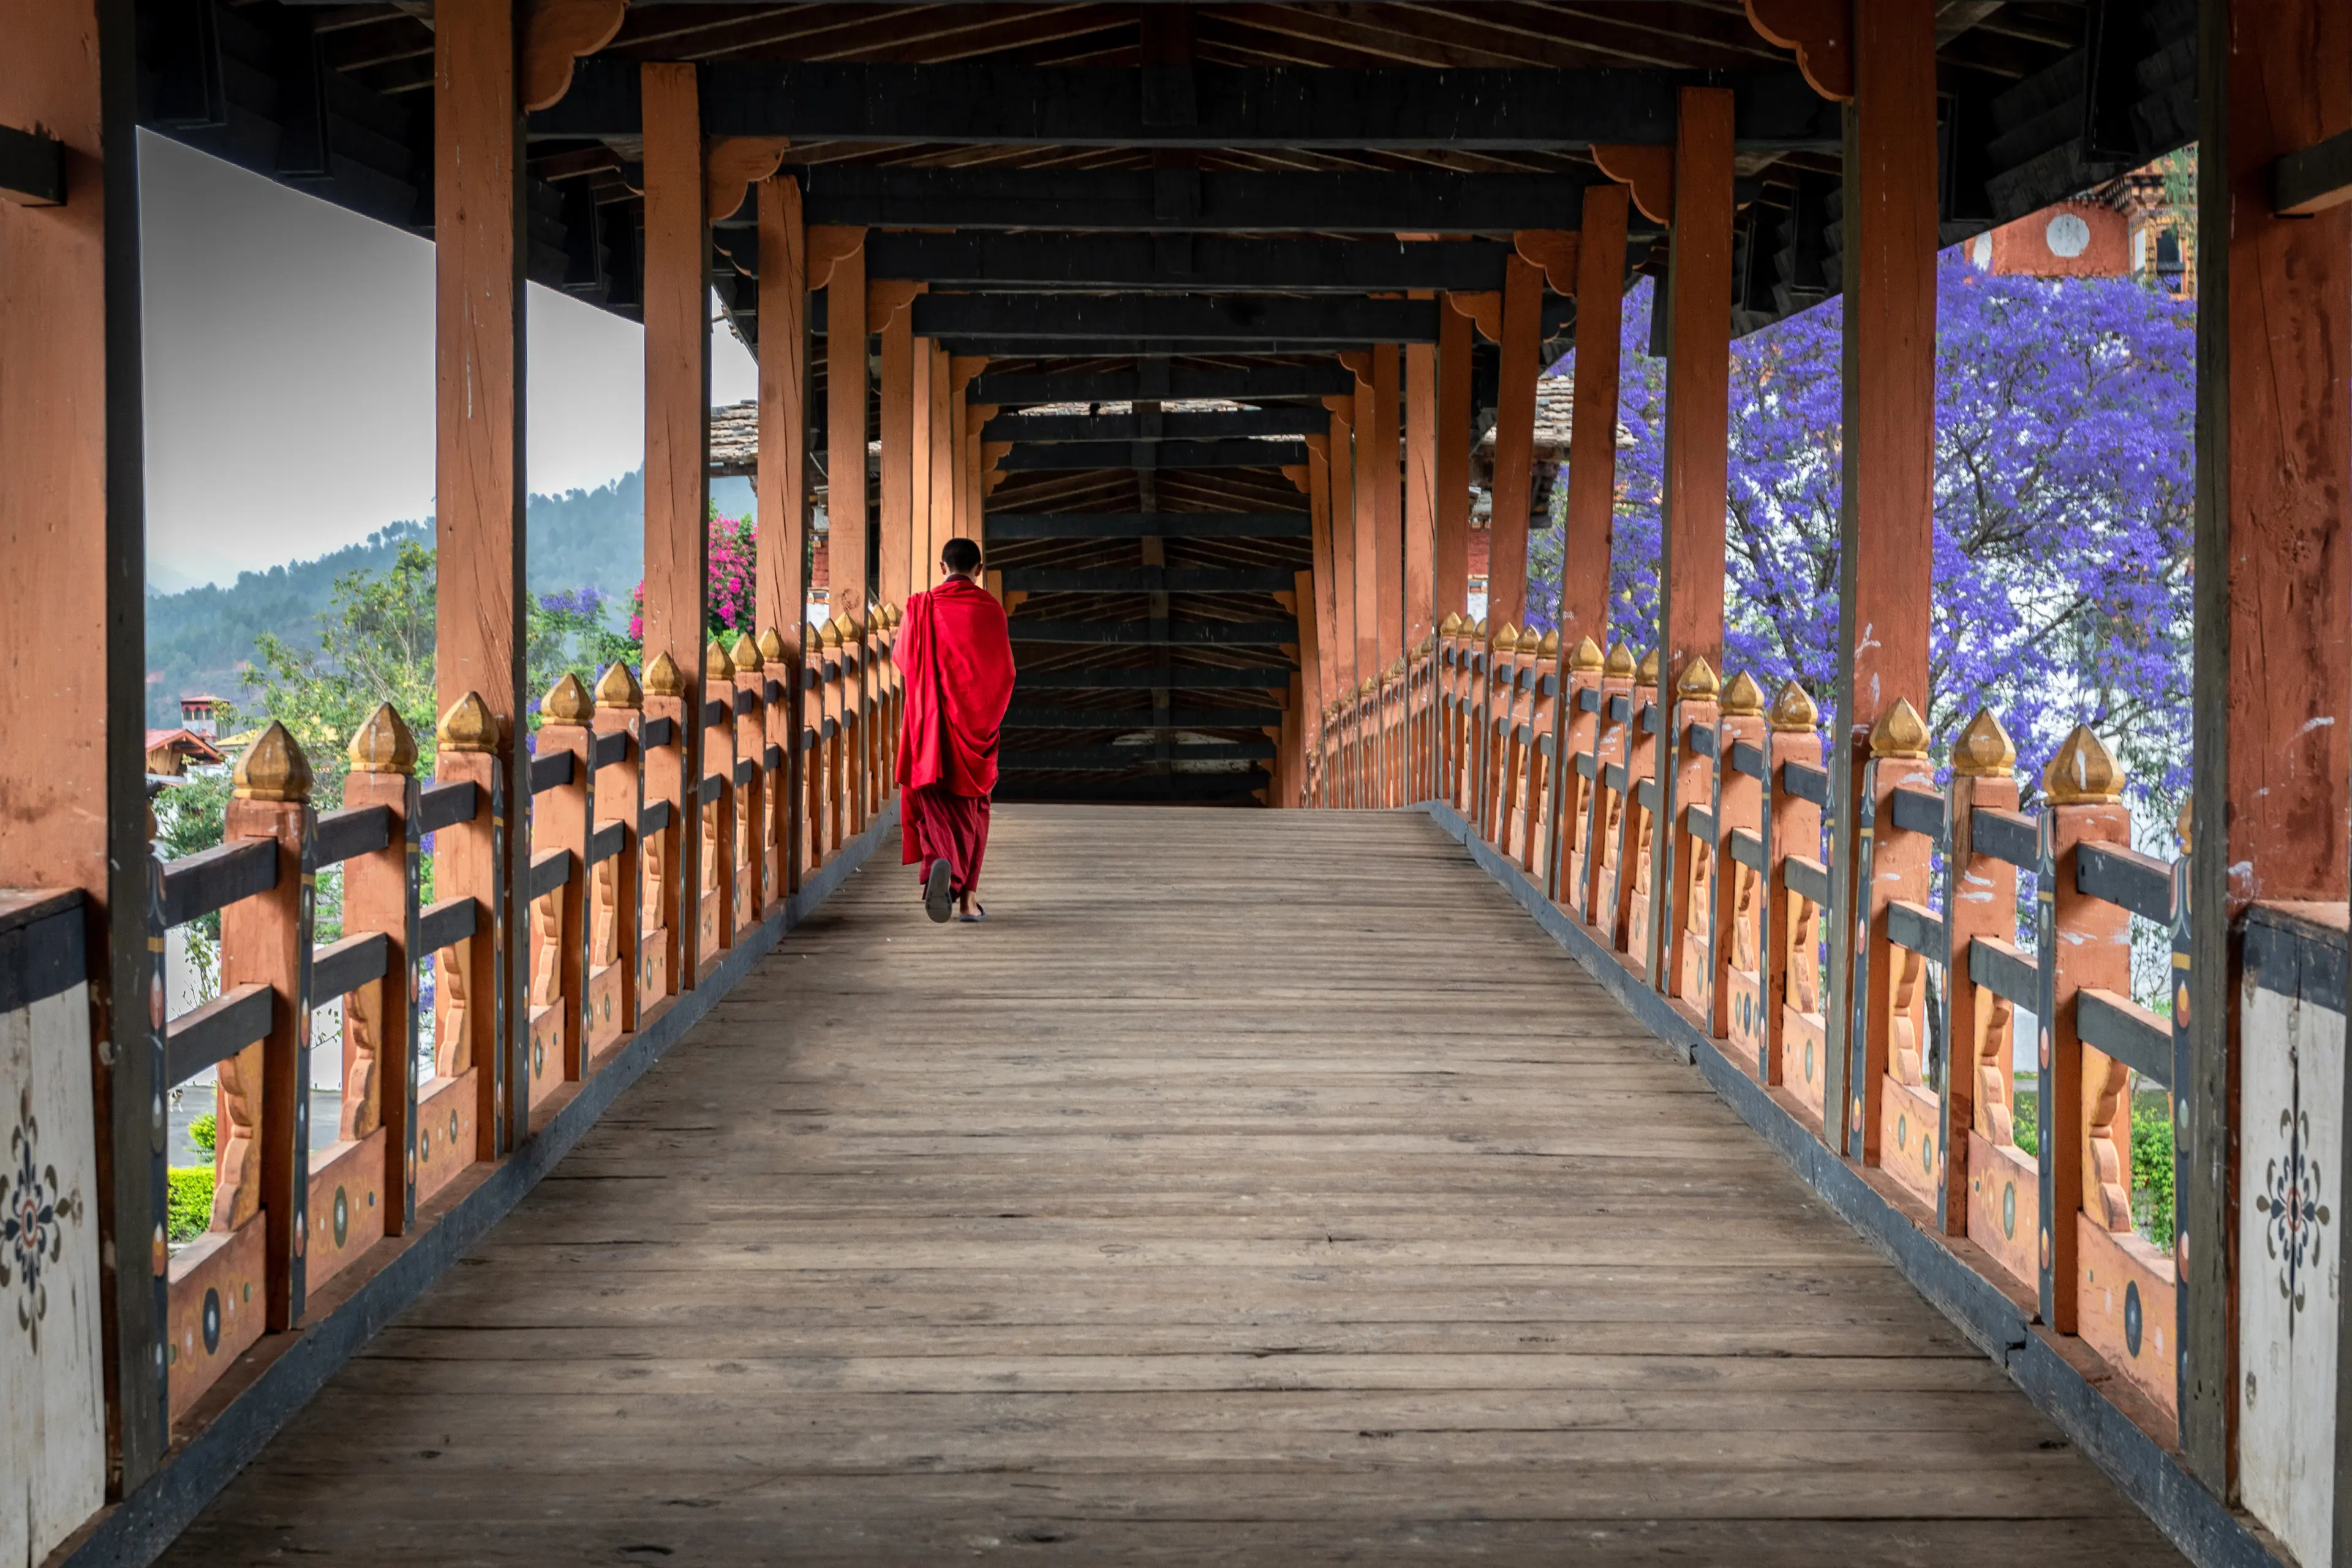 2-Day Solo Relaxation and Shopping Adventure in Bhutan